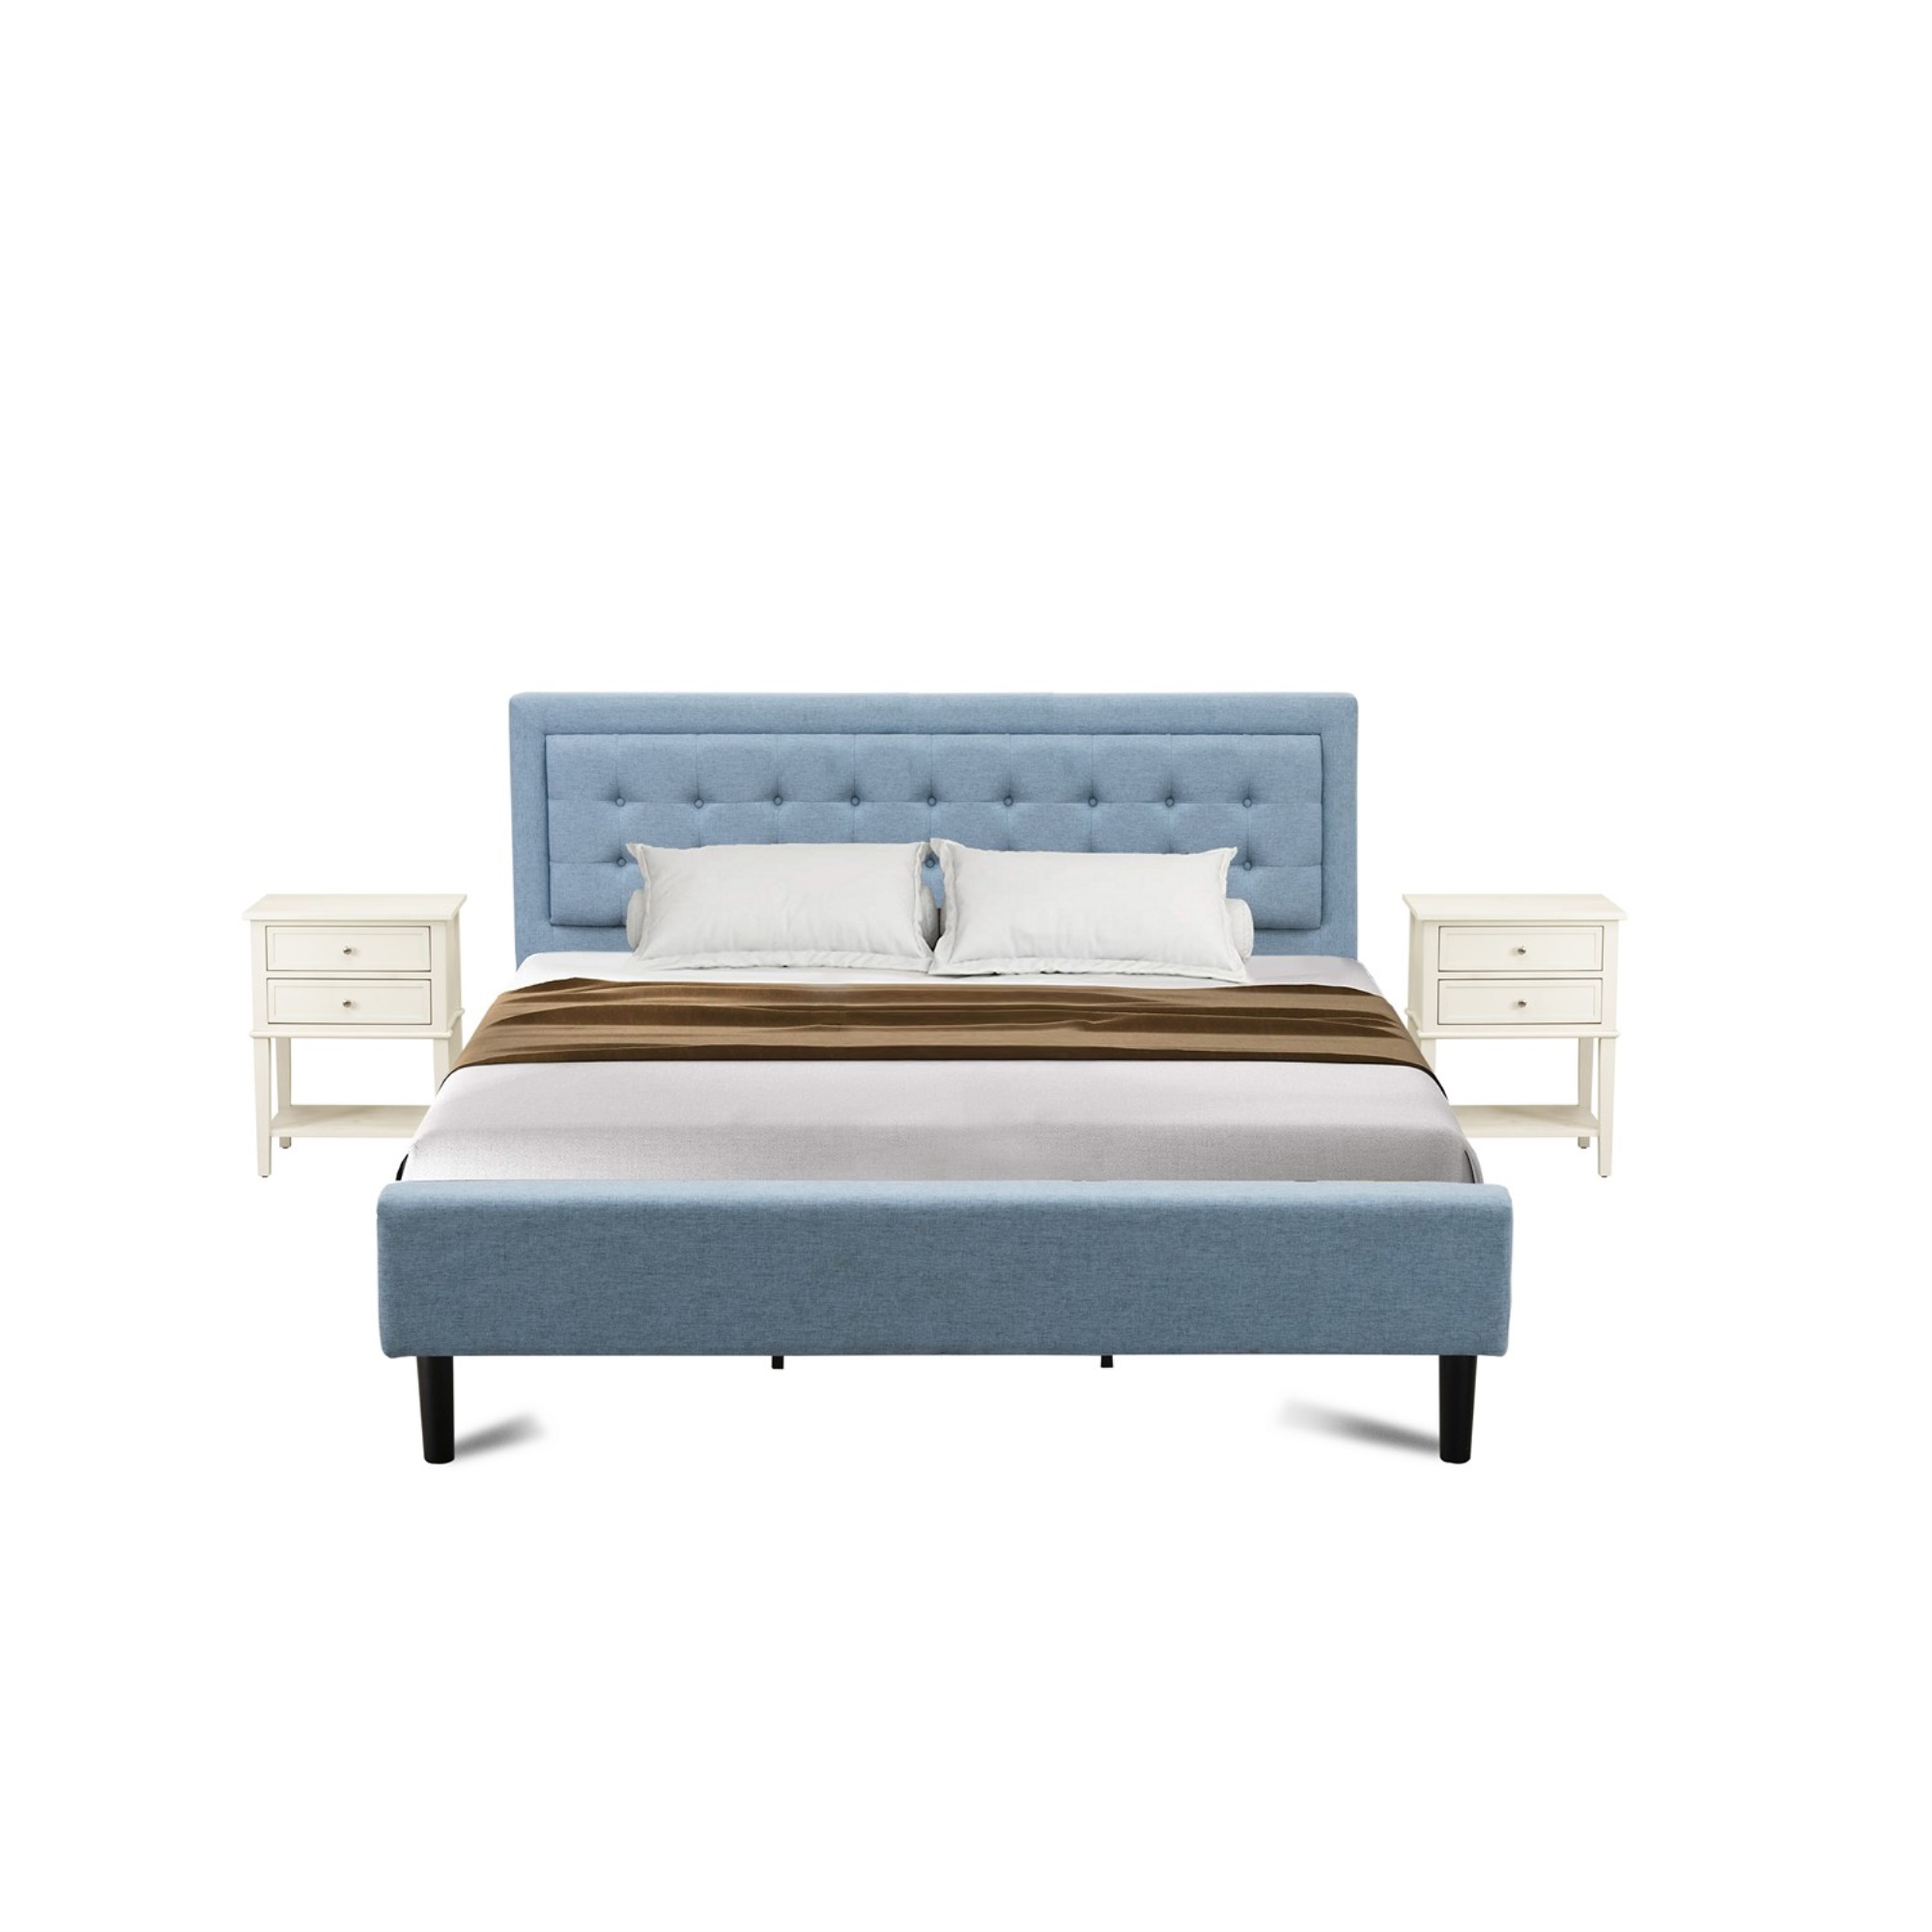 East West Furniture FN11K-2VL0C 3-Piece Platform Bed Set with 1 Modern Bed and 2 Bedroom Nightstands - Reliable and Sturdy Manufacturing - Denim B